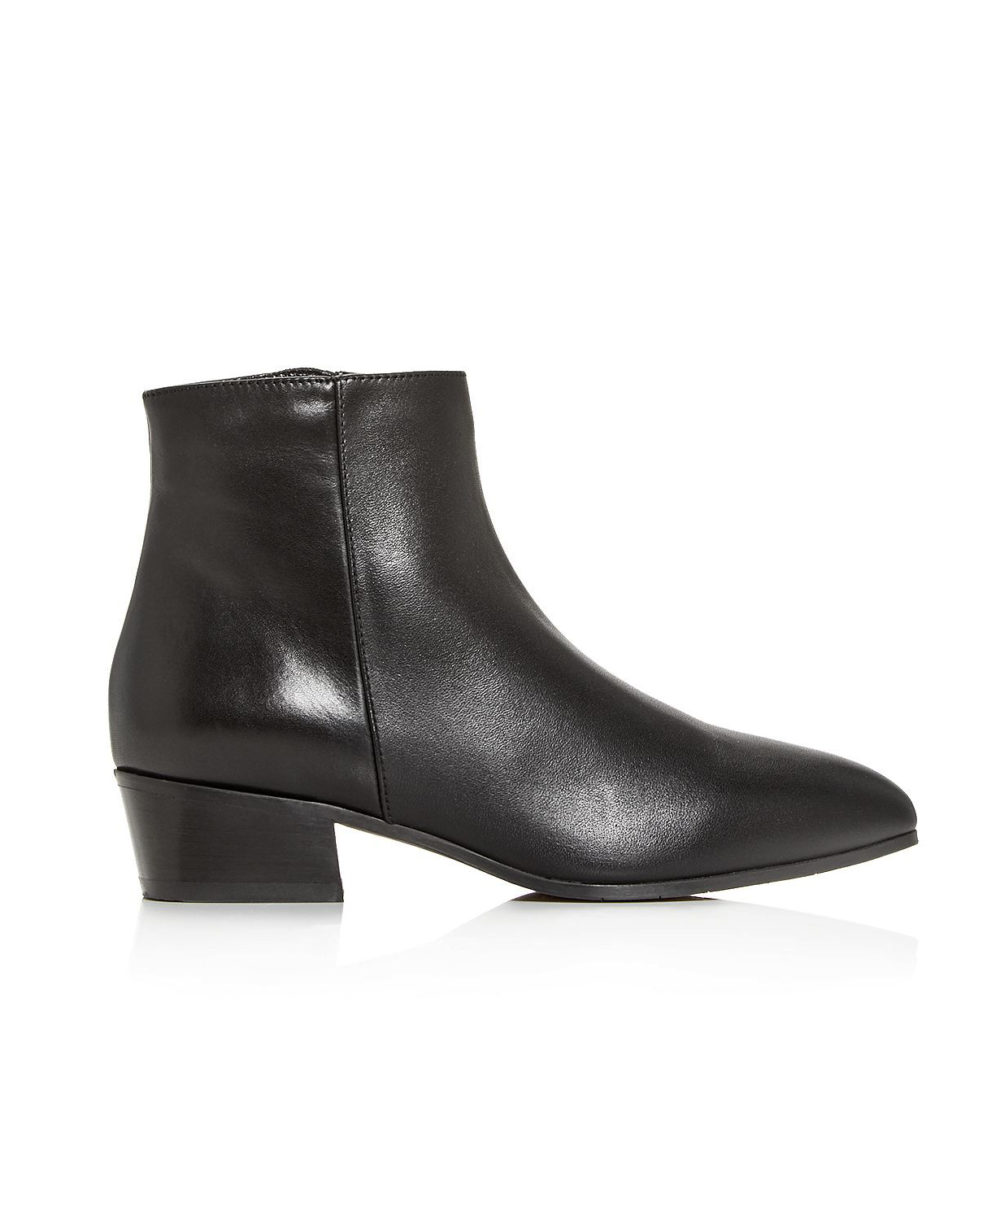 www.couturepoint.com-aquatalia-womens-black-leather-fuoco-weatherproof-ankle-boots